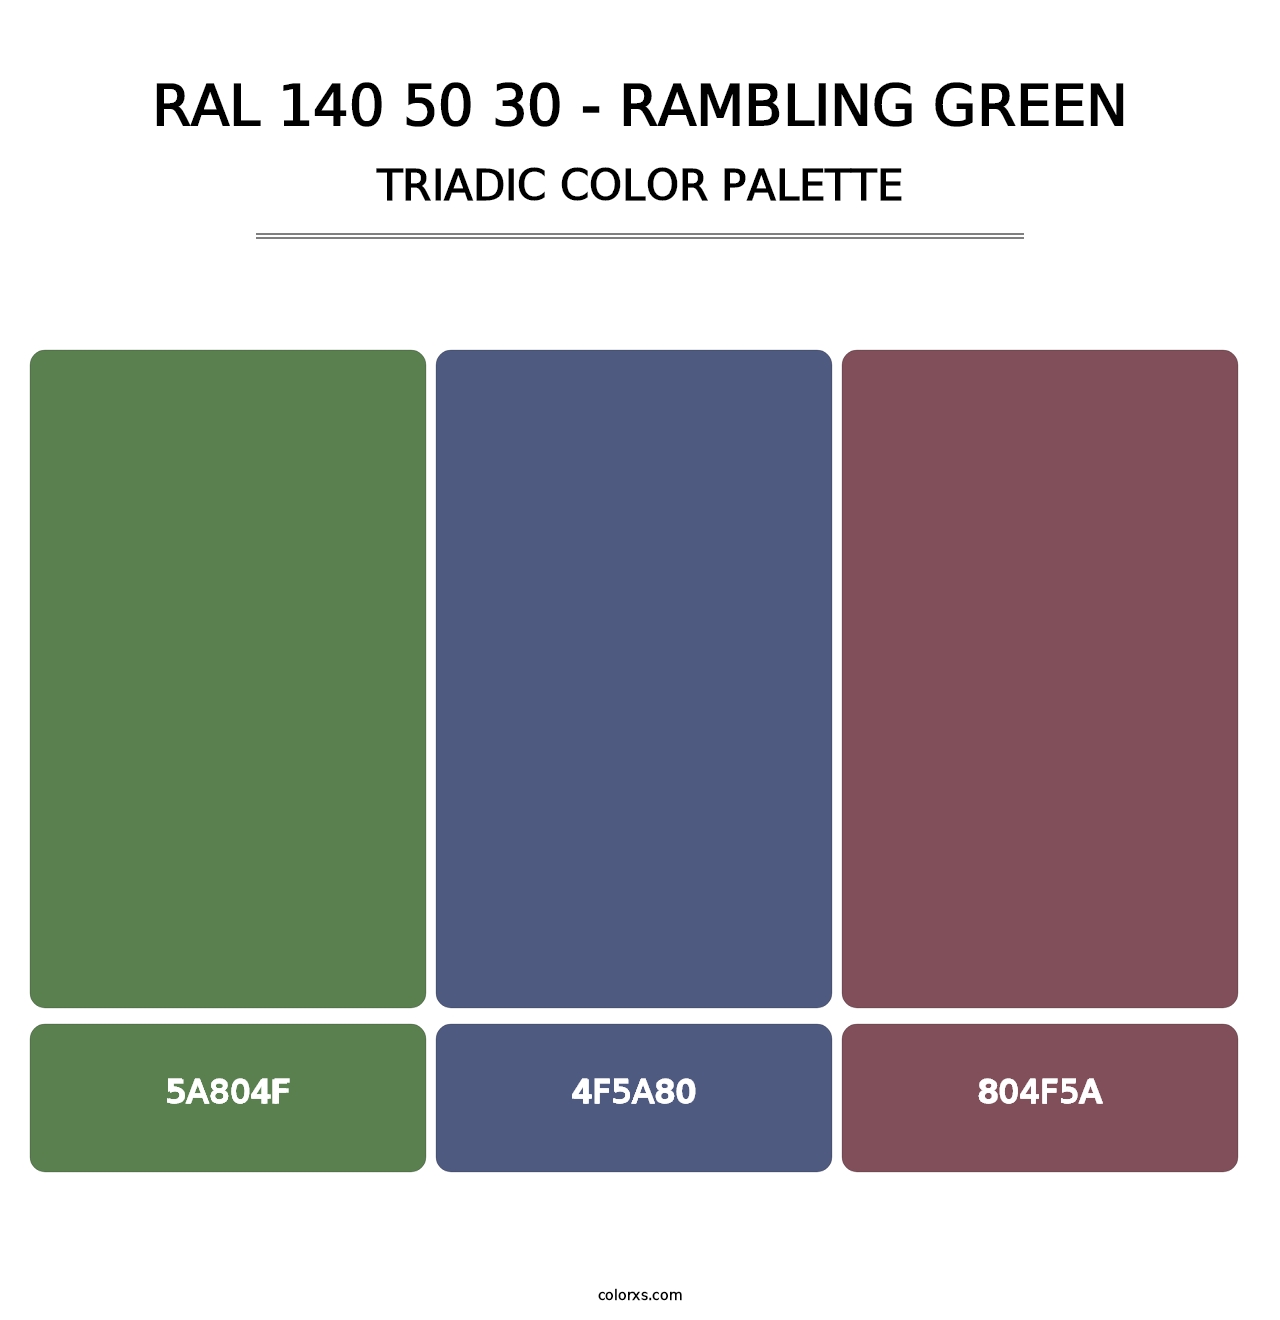 RAL 140 50 30 - Rambling Green - Triadic Color Palette